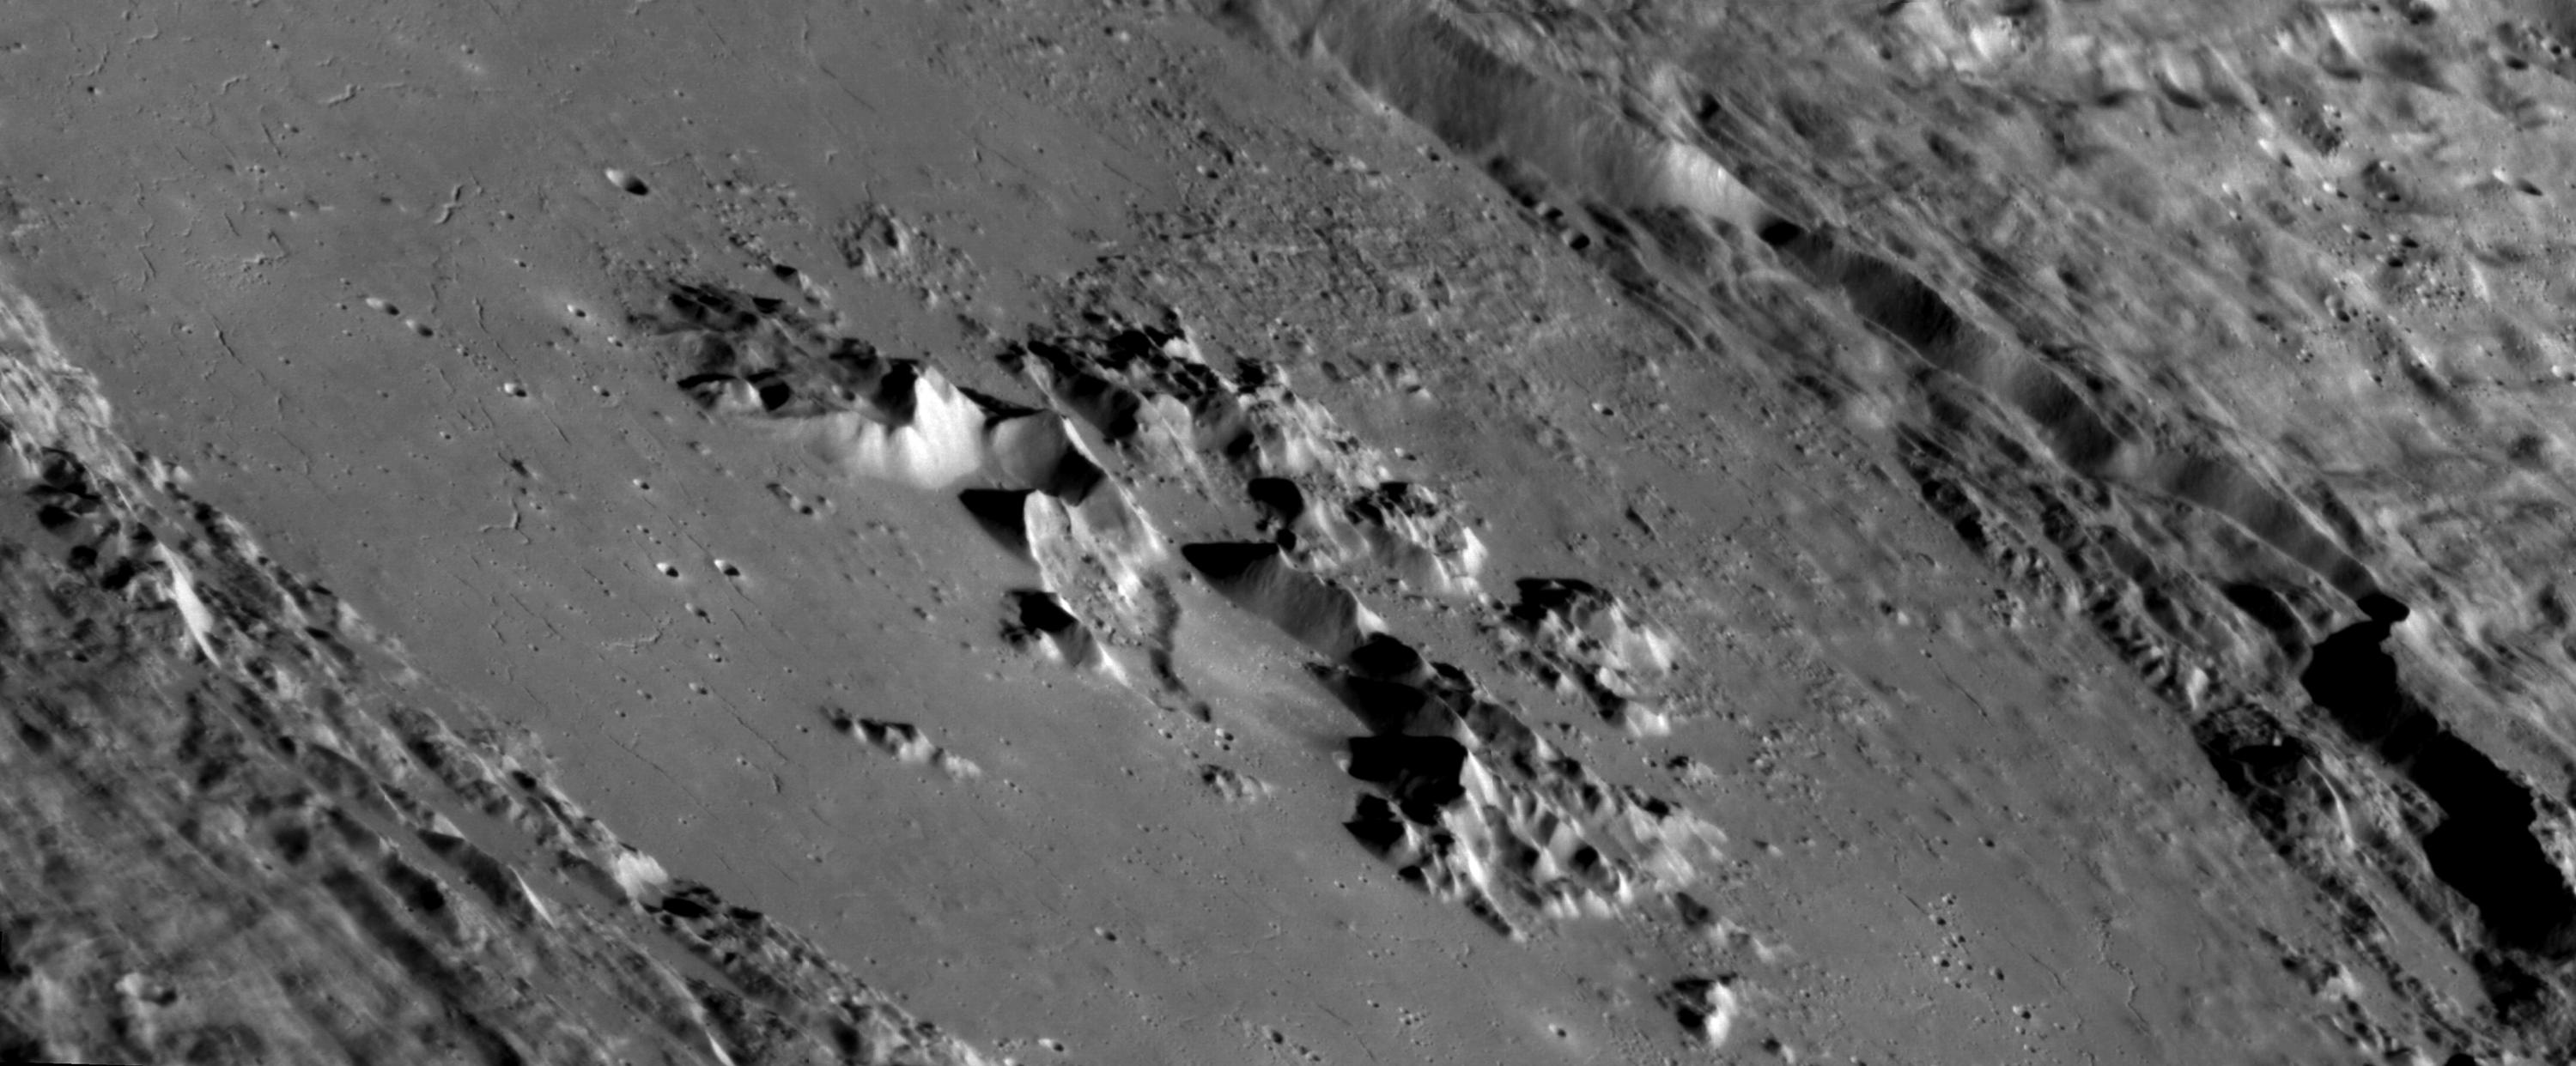 Mountains in a crater on Mercury.